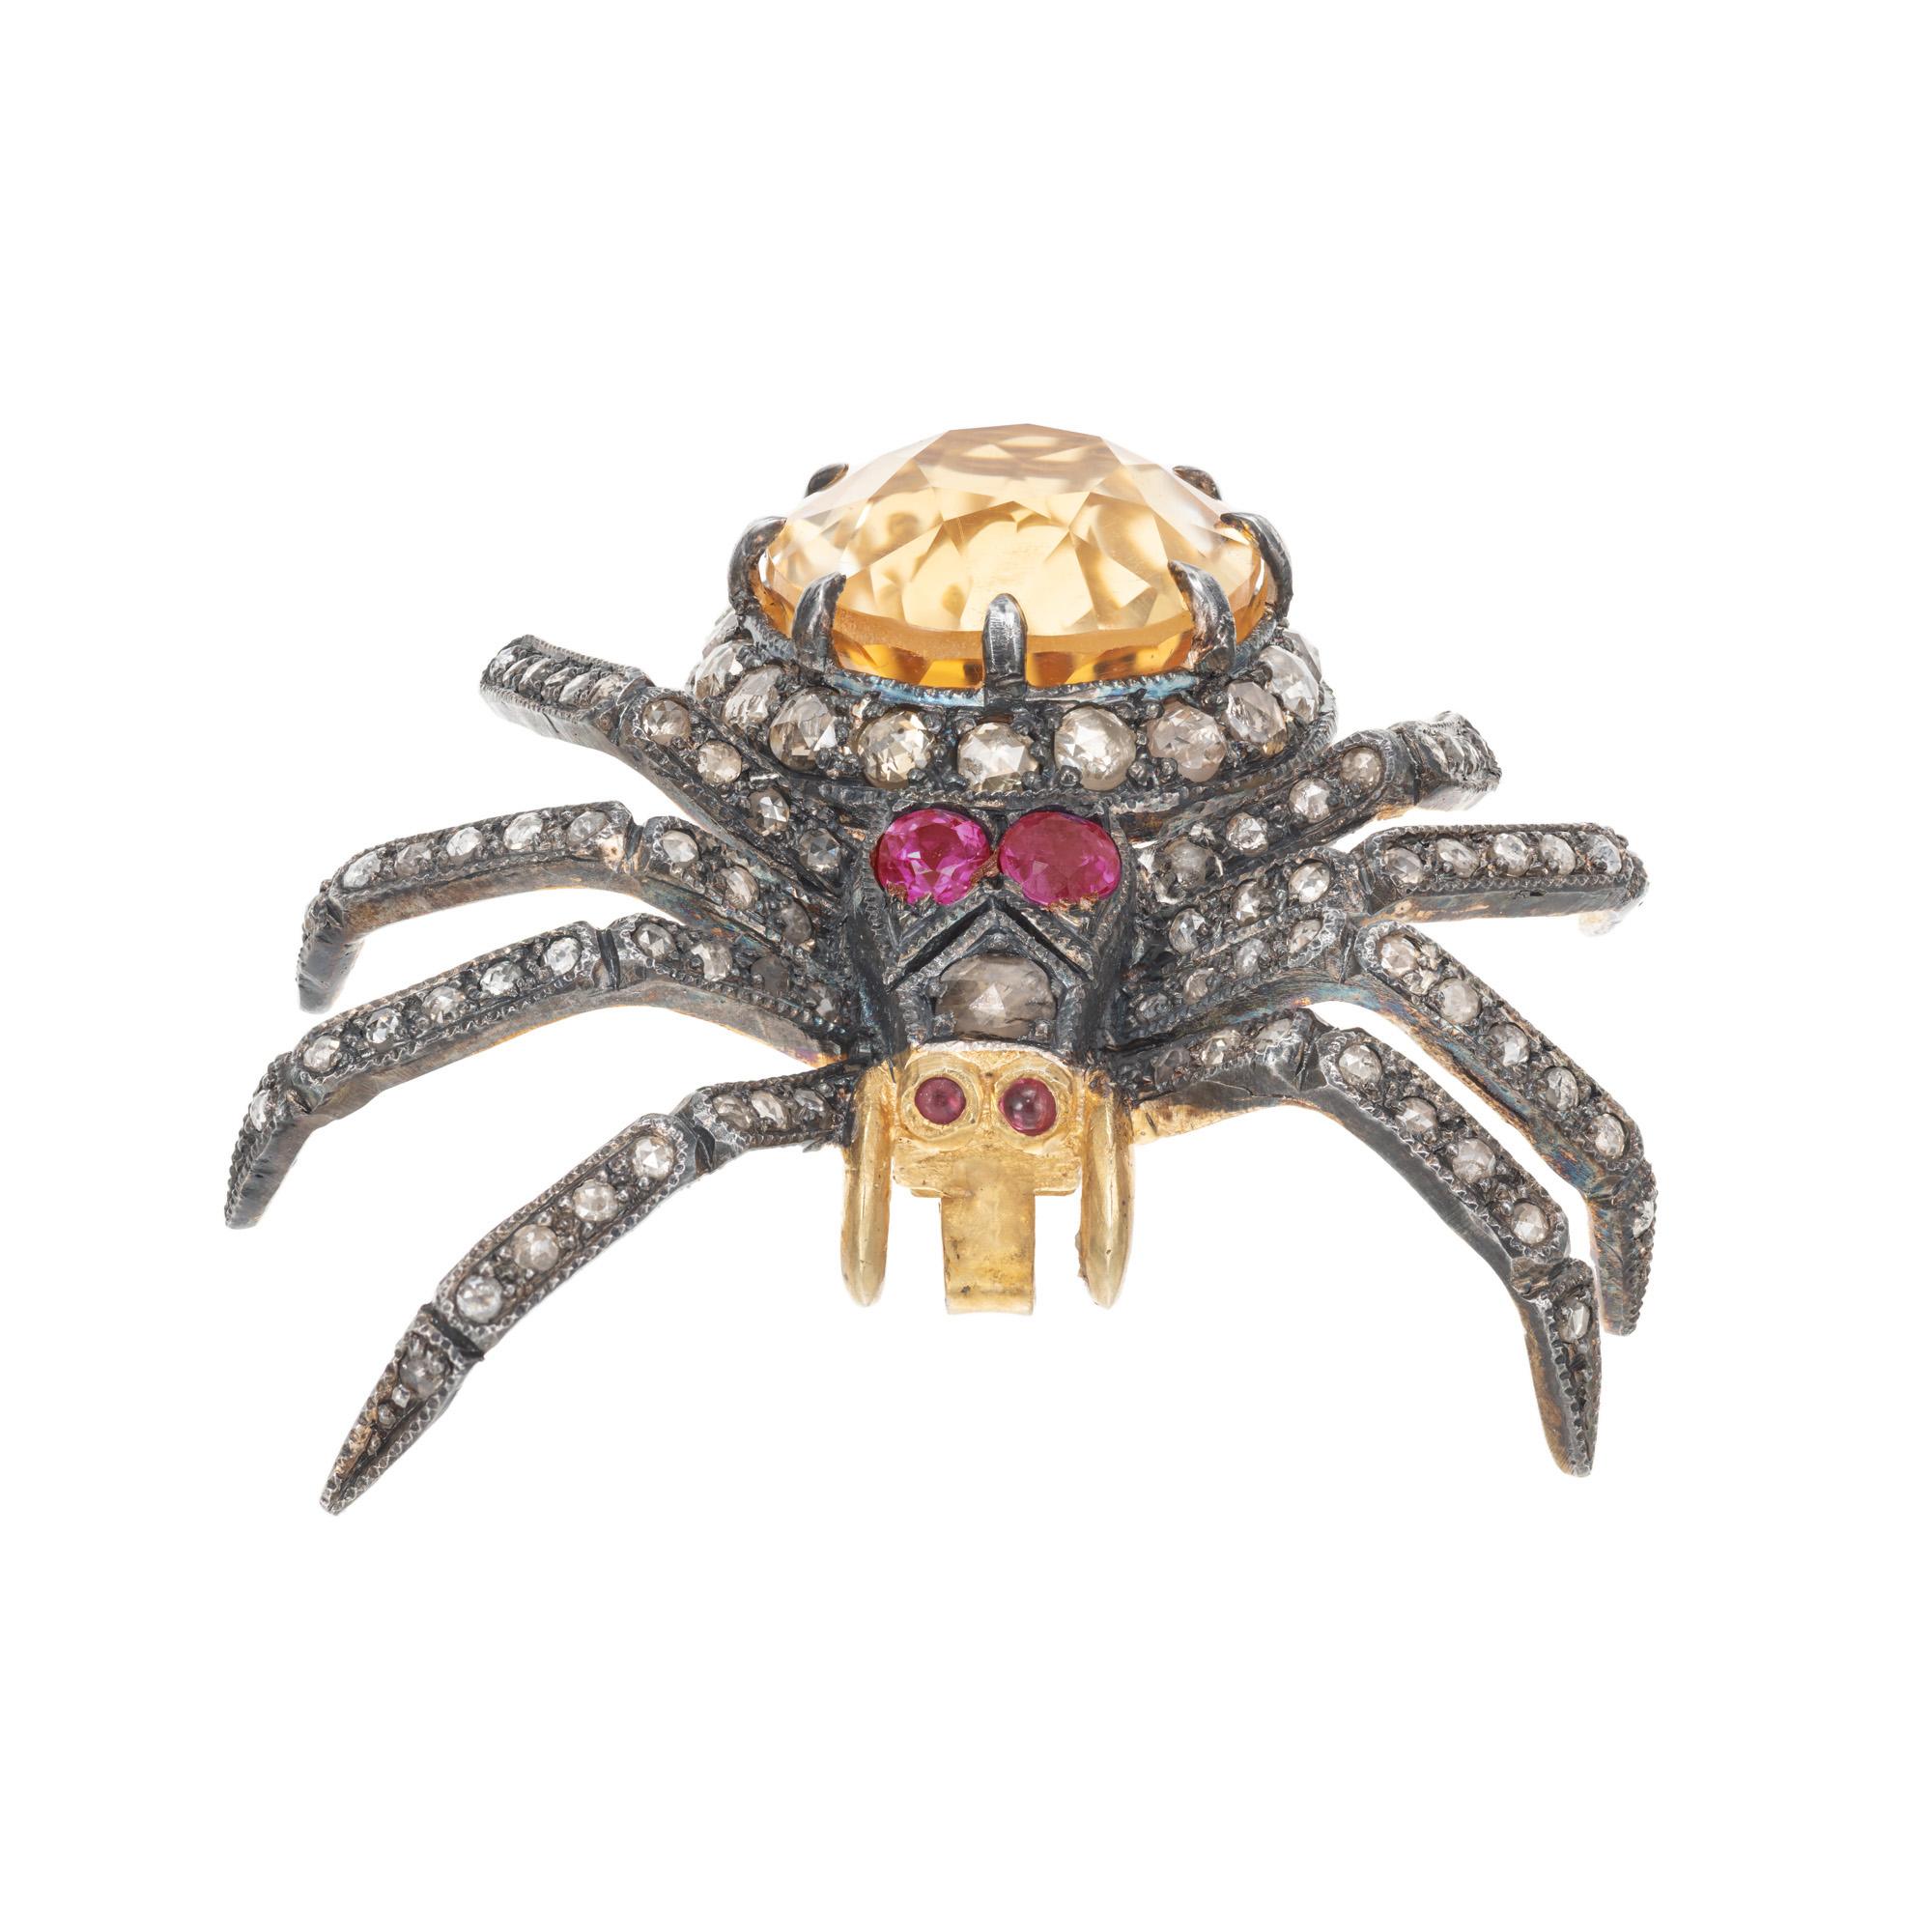 Antique reproduction spider brooch and pendant. Set with 1 oval yellow/orange citrine totaling 7.00cts accented with 2 round pinkish rubies as eyes and 2 cabochon red rubies. 95 rose cut light brown diamonds round out this unique piece. The design